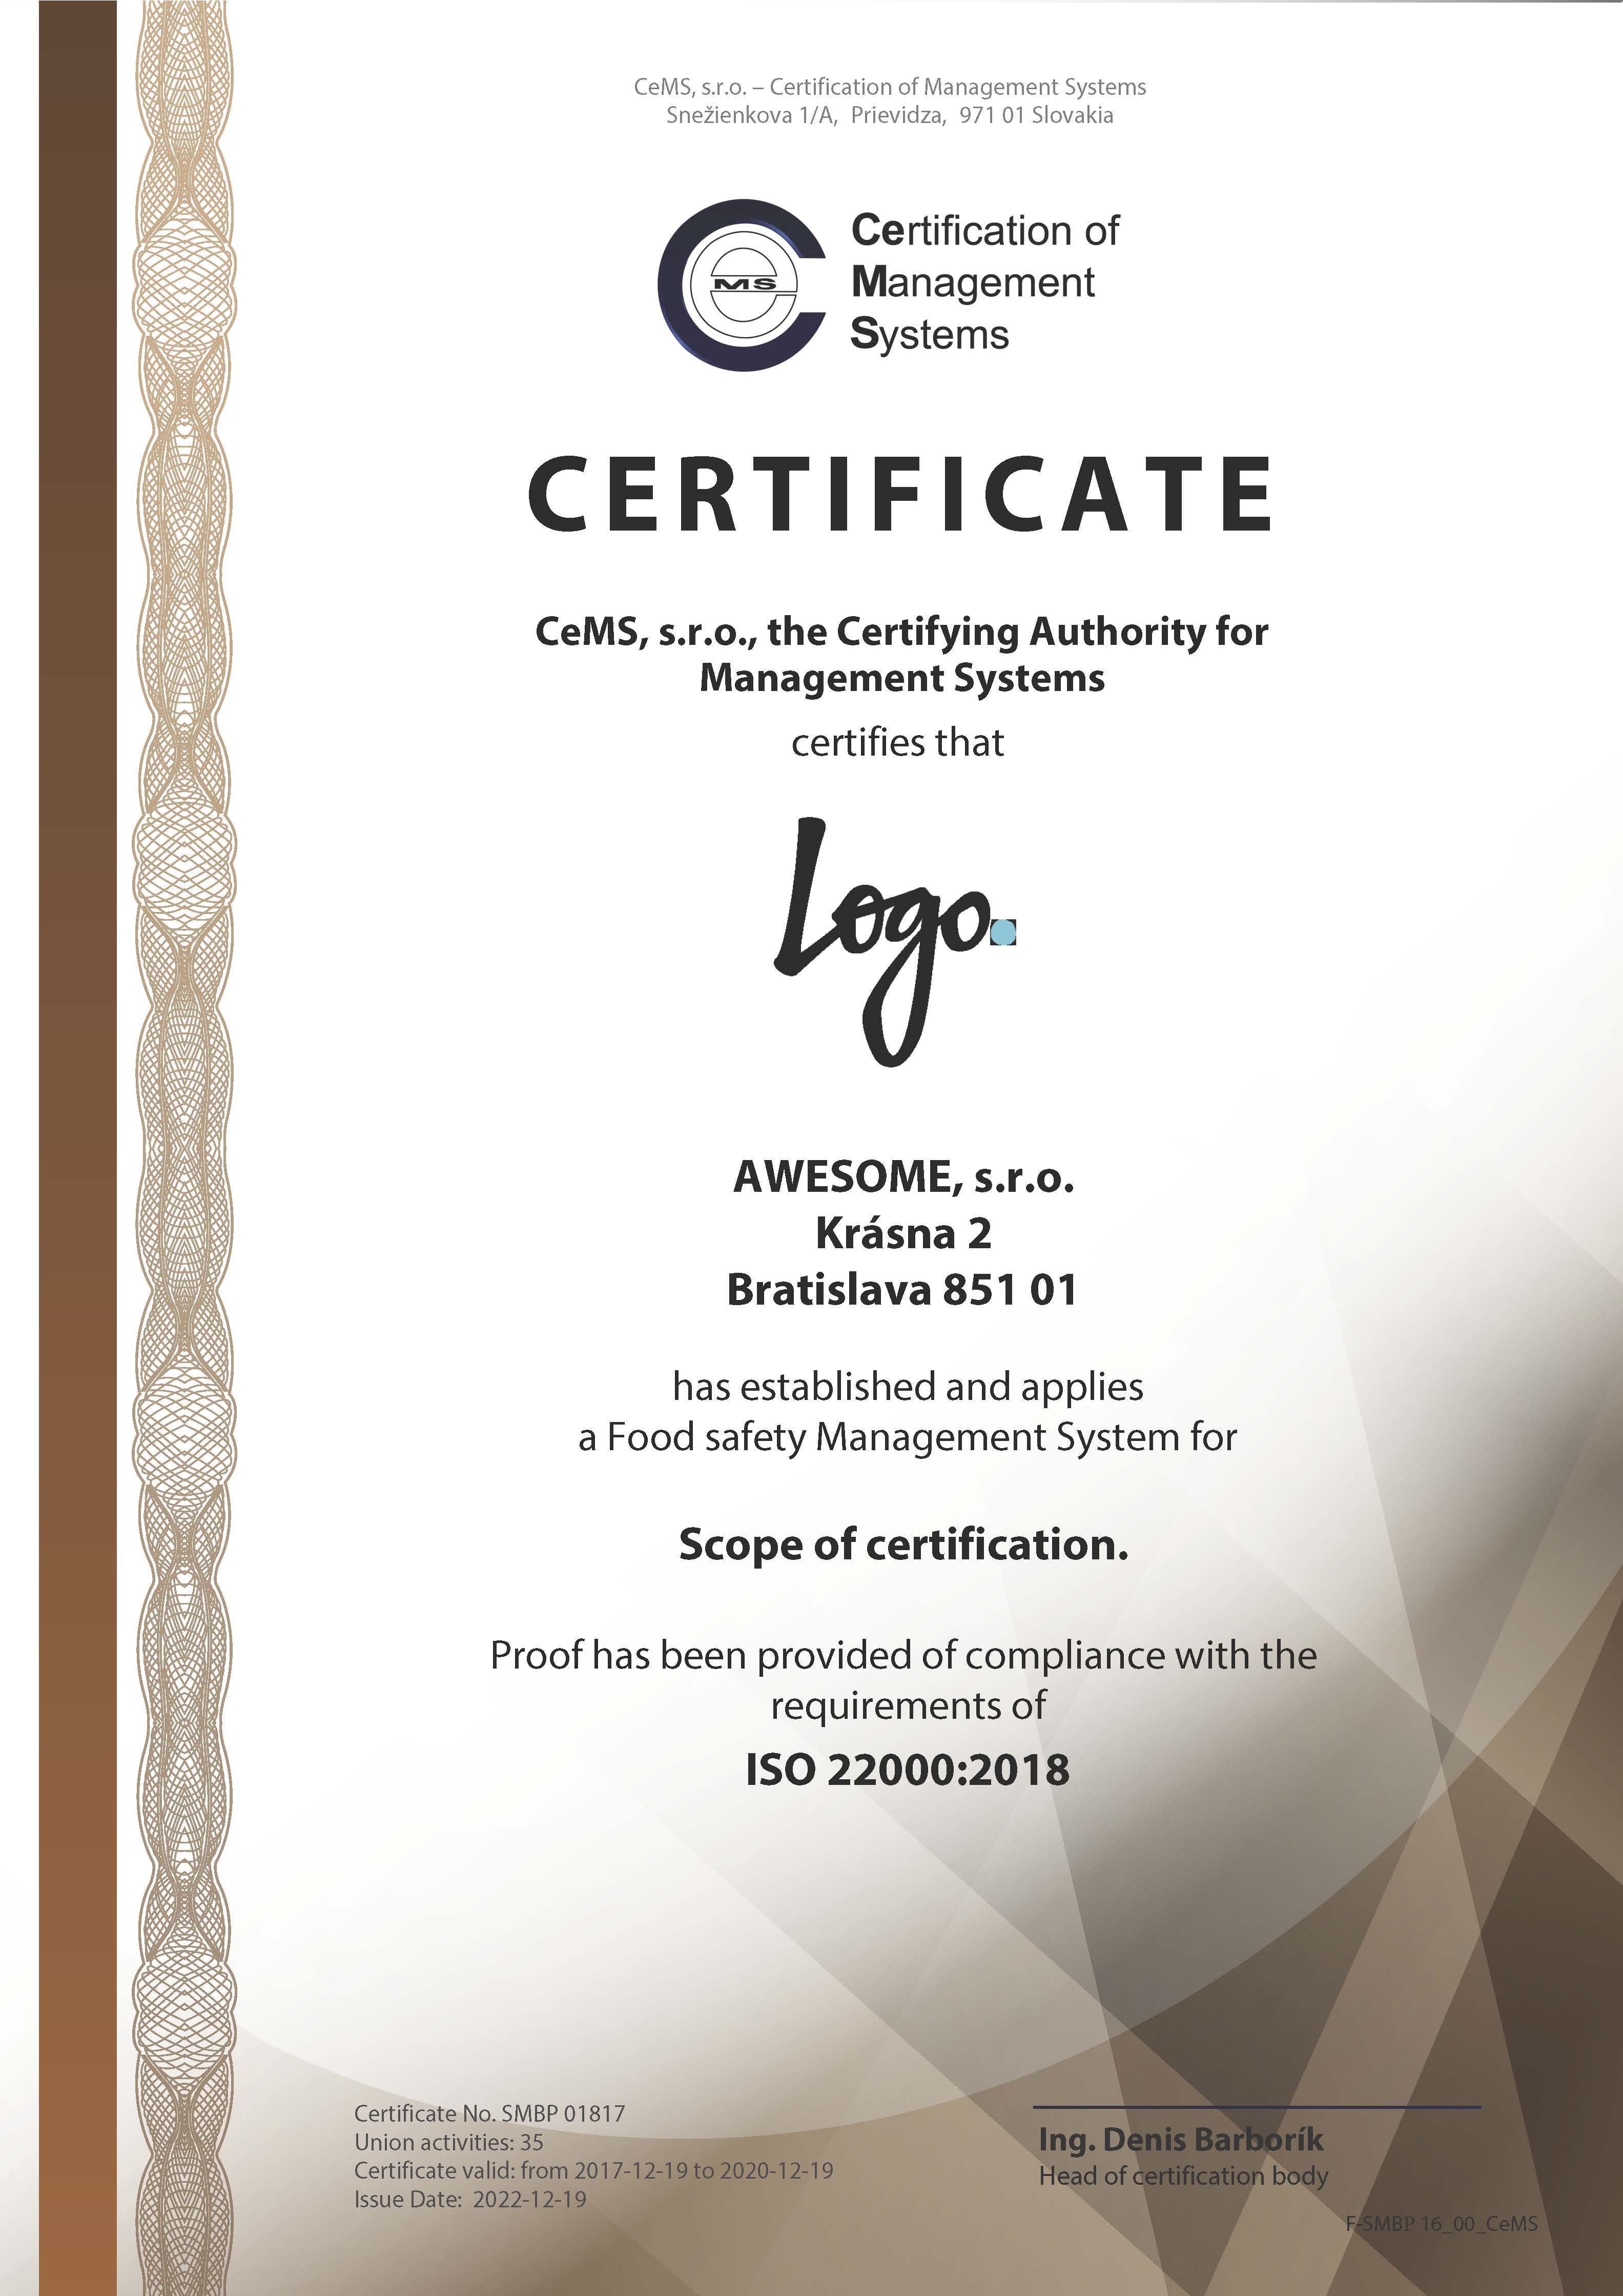 Certificate ISO 22000 by CeMS